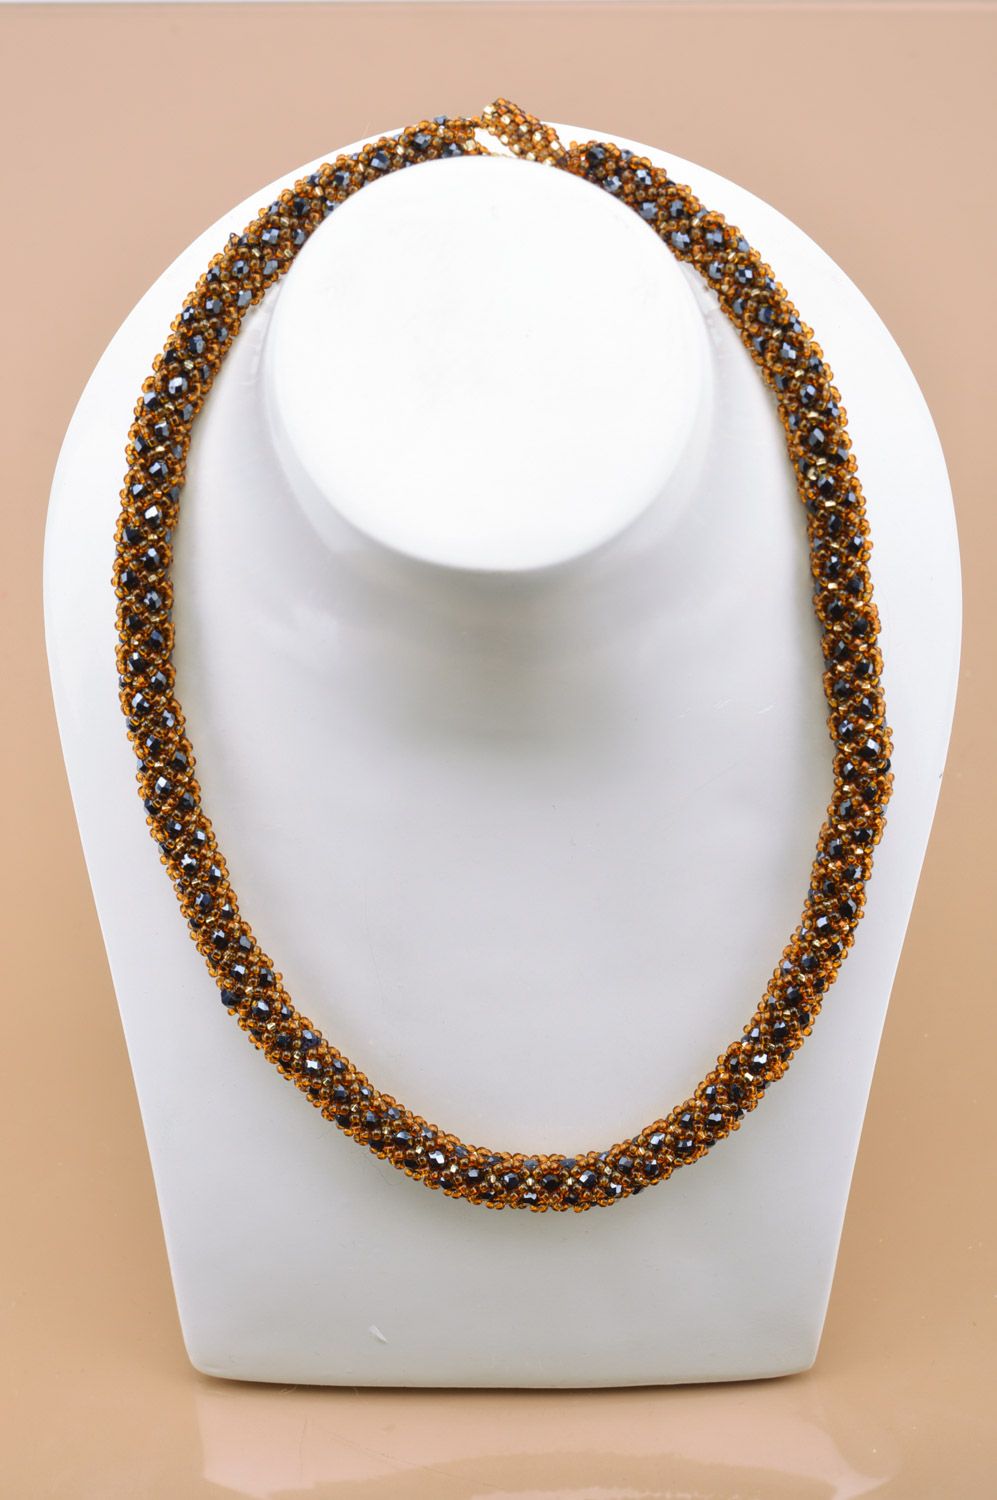 Handmade beaded cord necklace with faceted beads in brown color palette photo 3